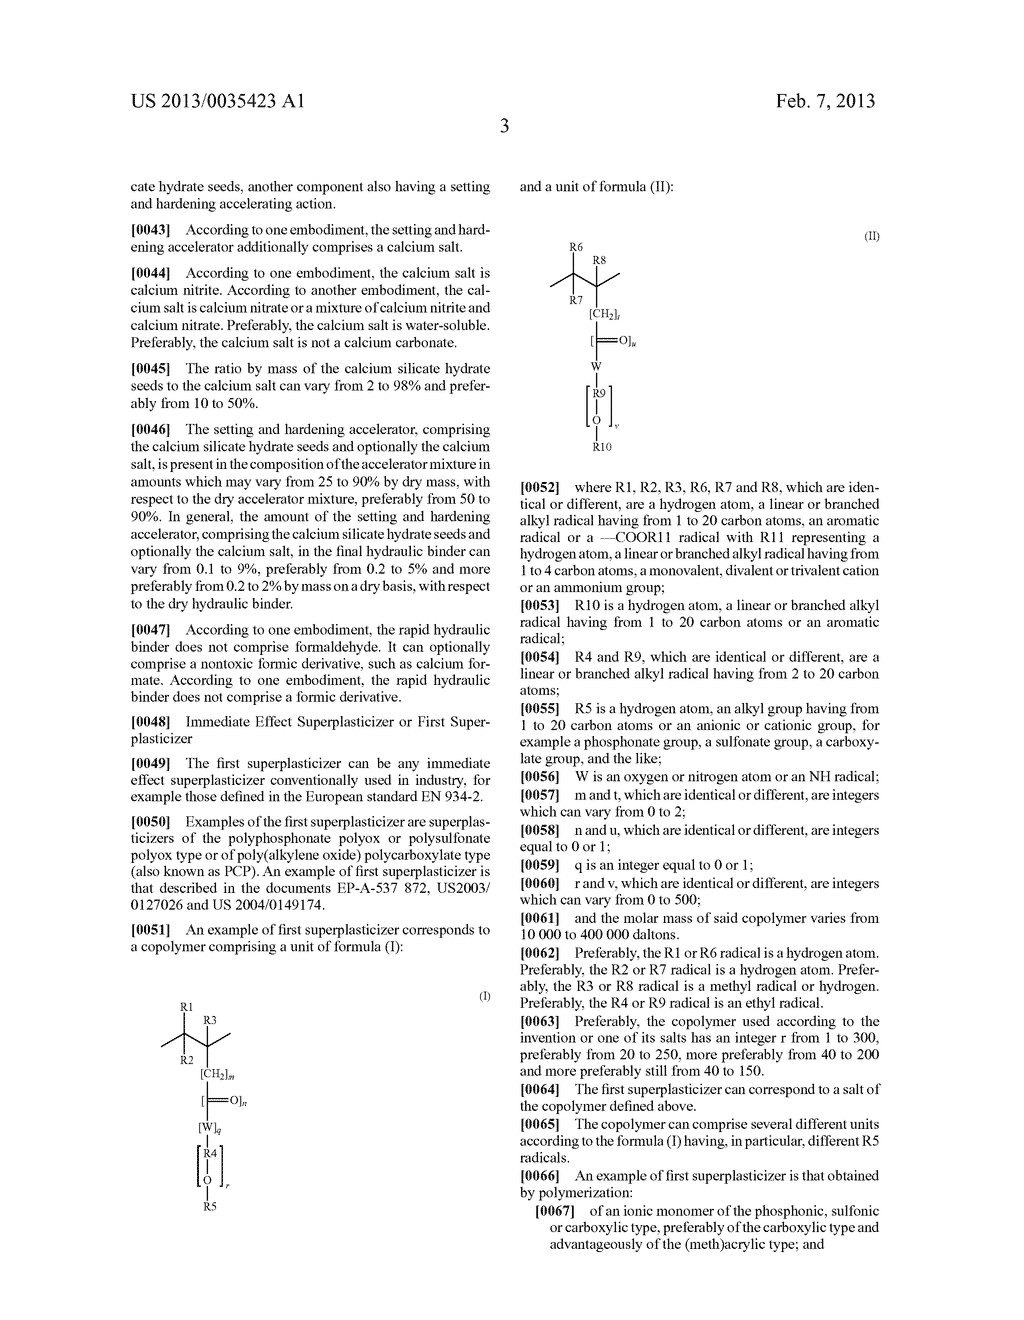 RAPID HYDRAULIC BINDER FOR CONCRETE PARTS AND STRUCTURES - diagram, schematic, and image 04